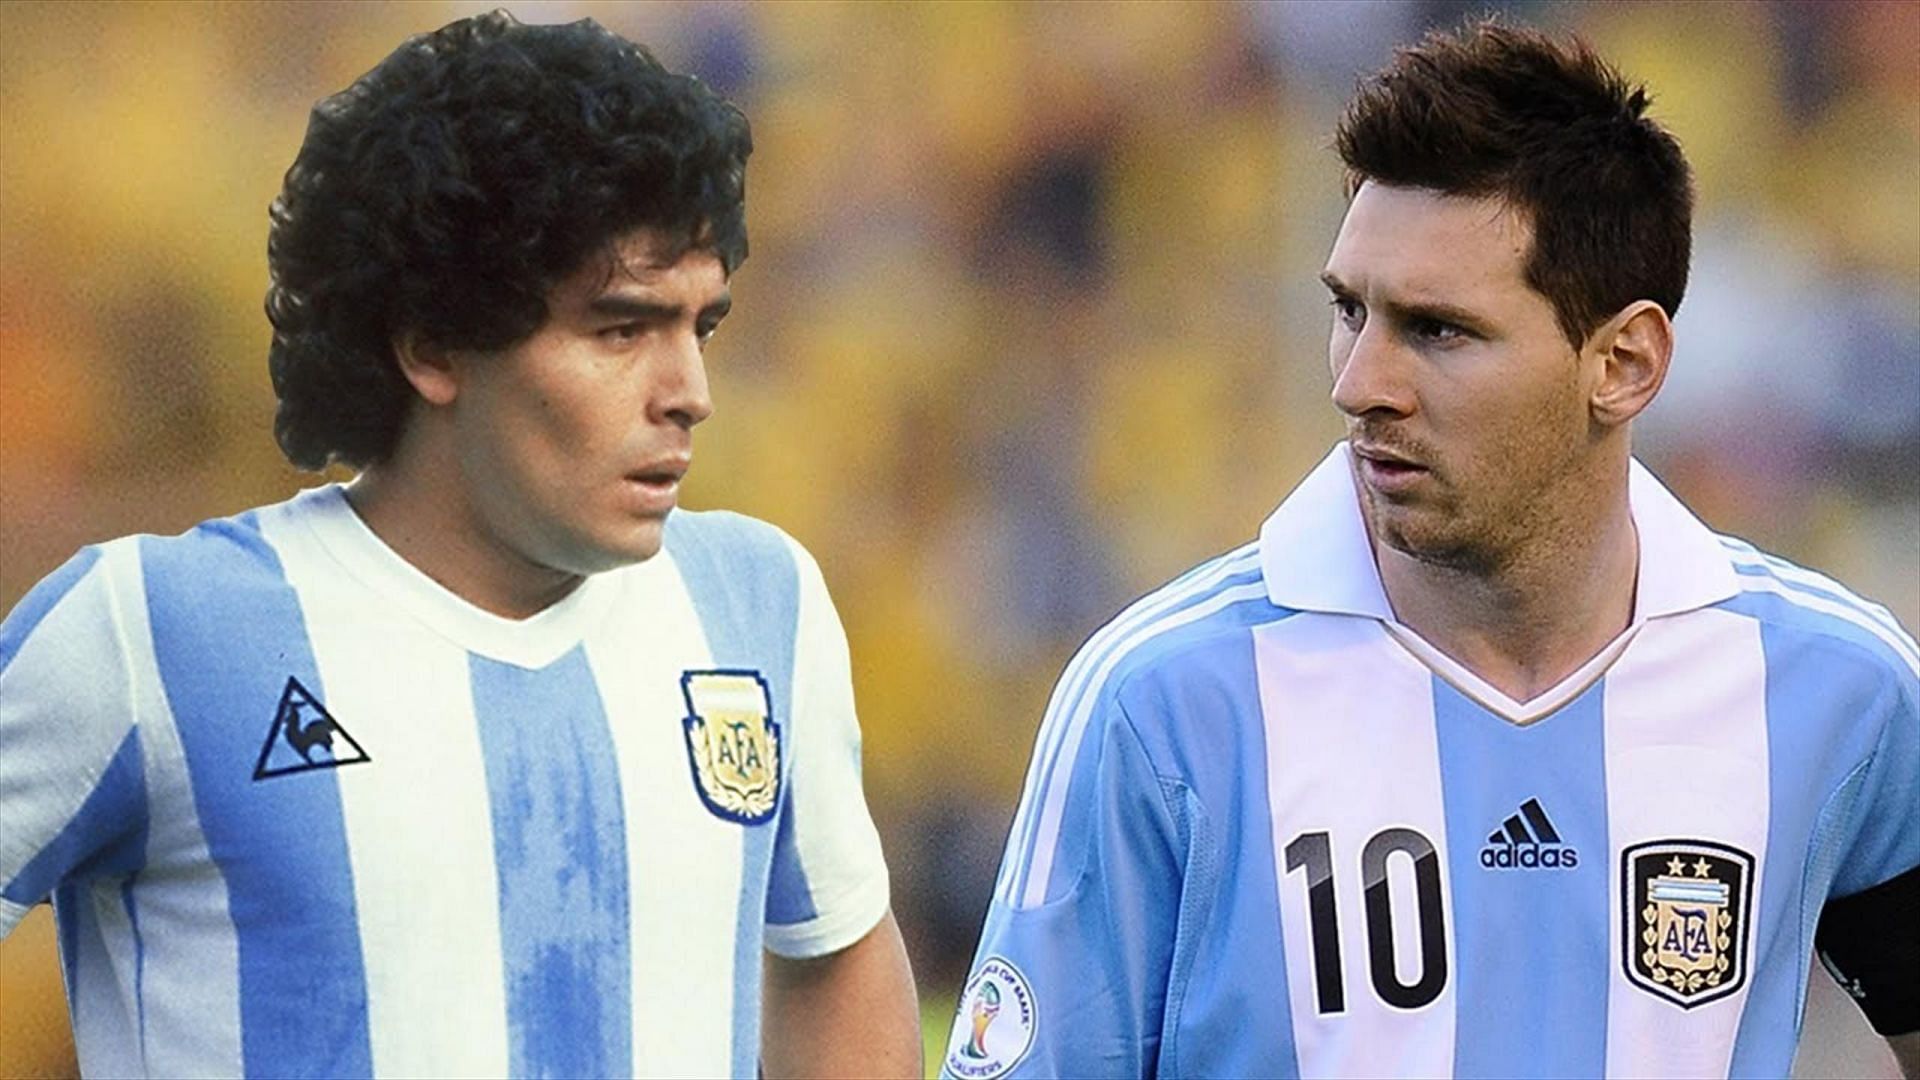 Diego Maradona (left) and Lionel Messi - two of the most gifted footballers of all time.